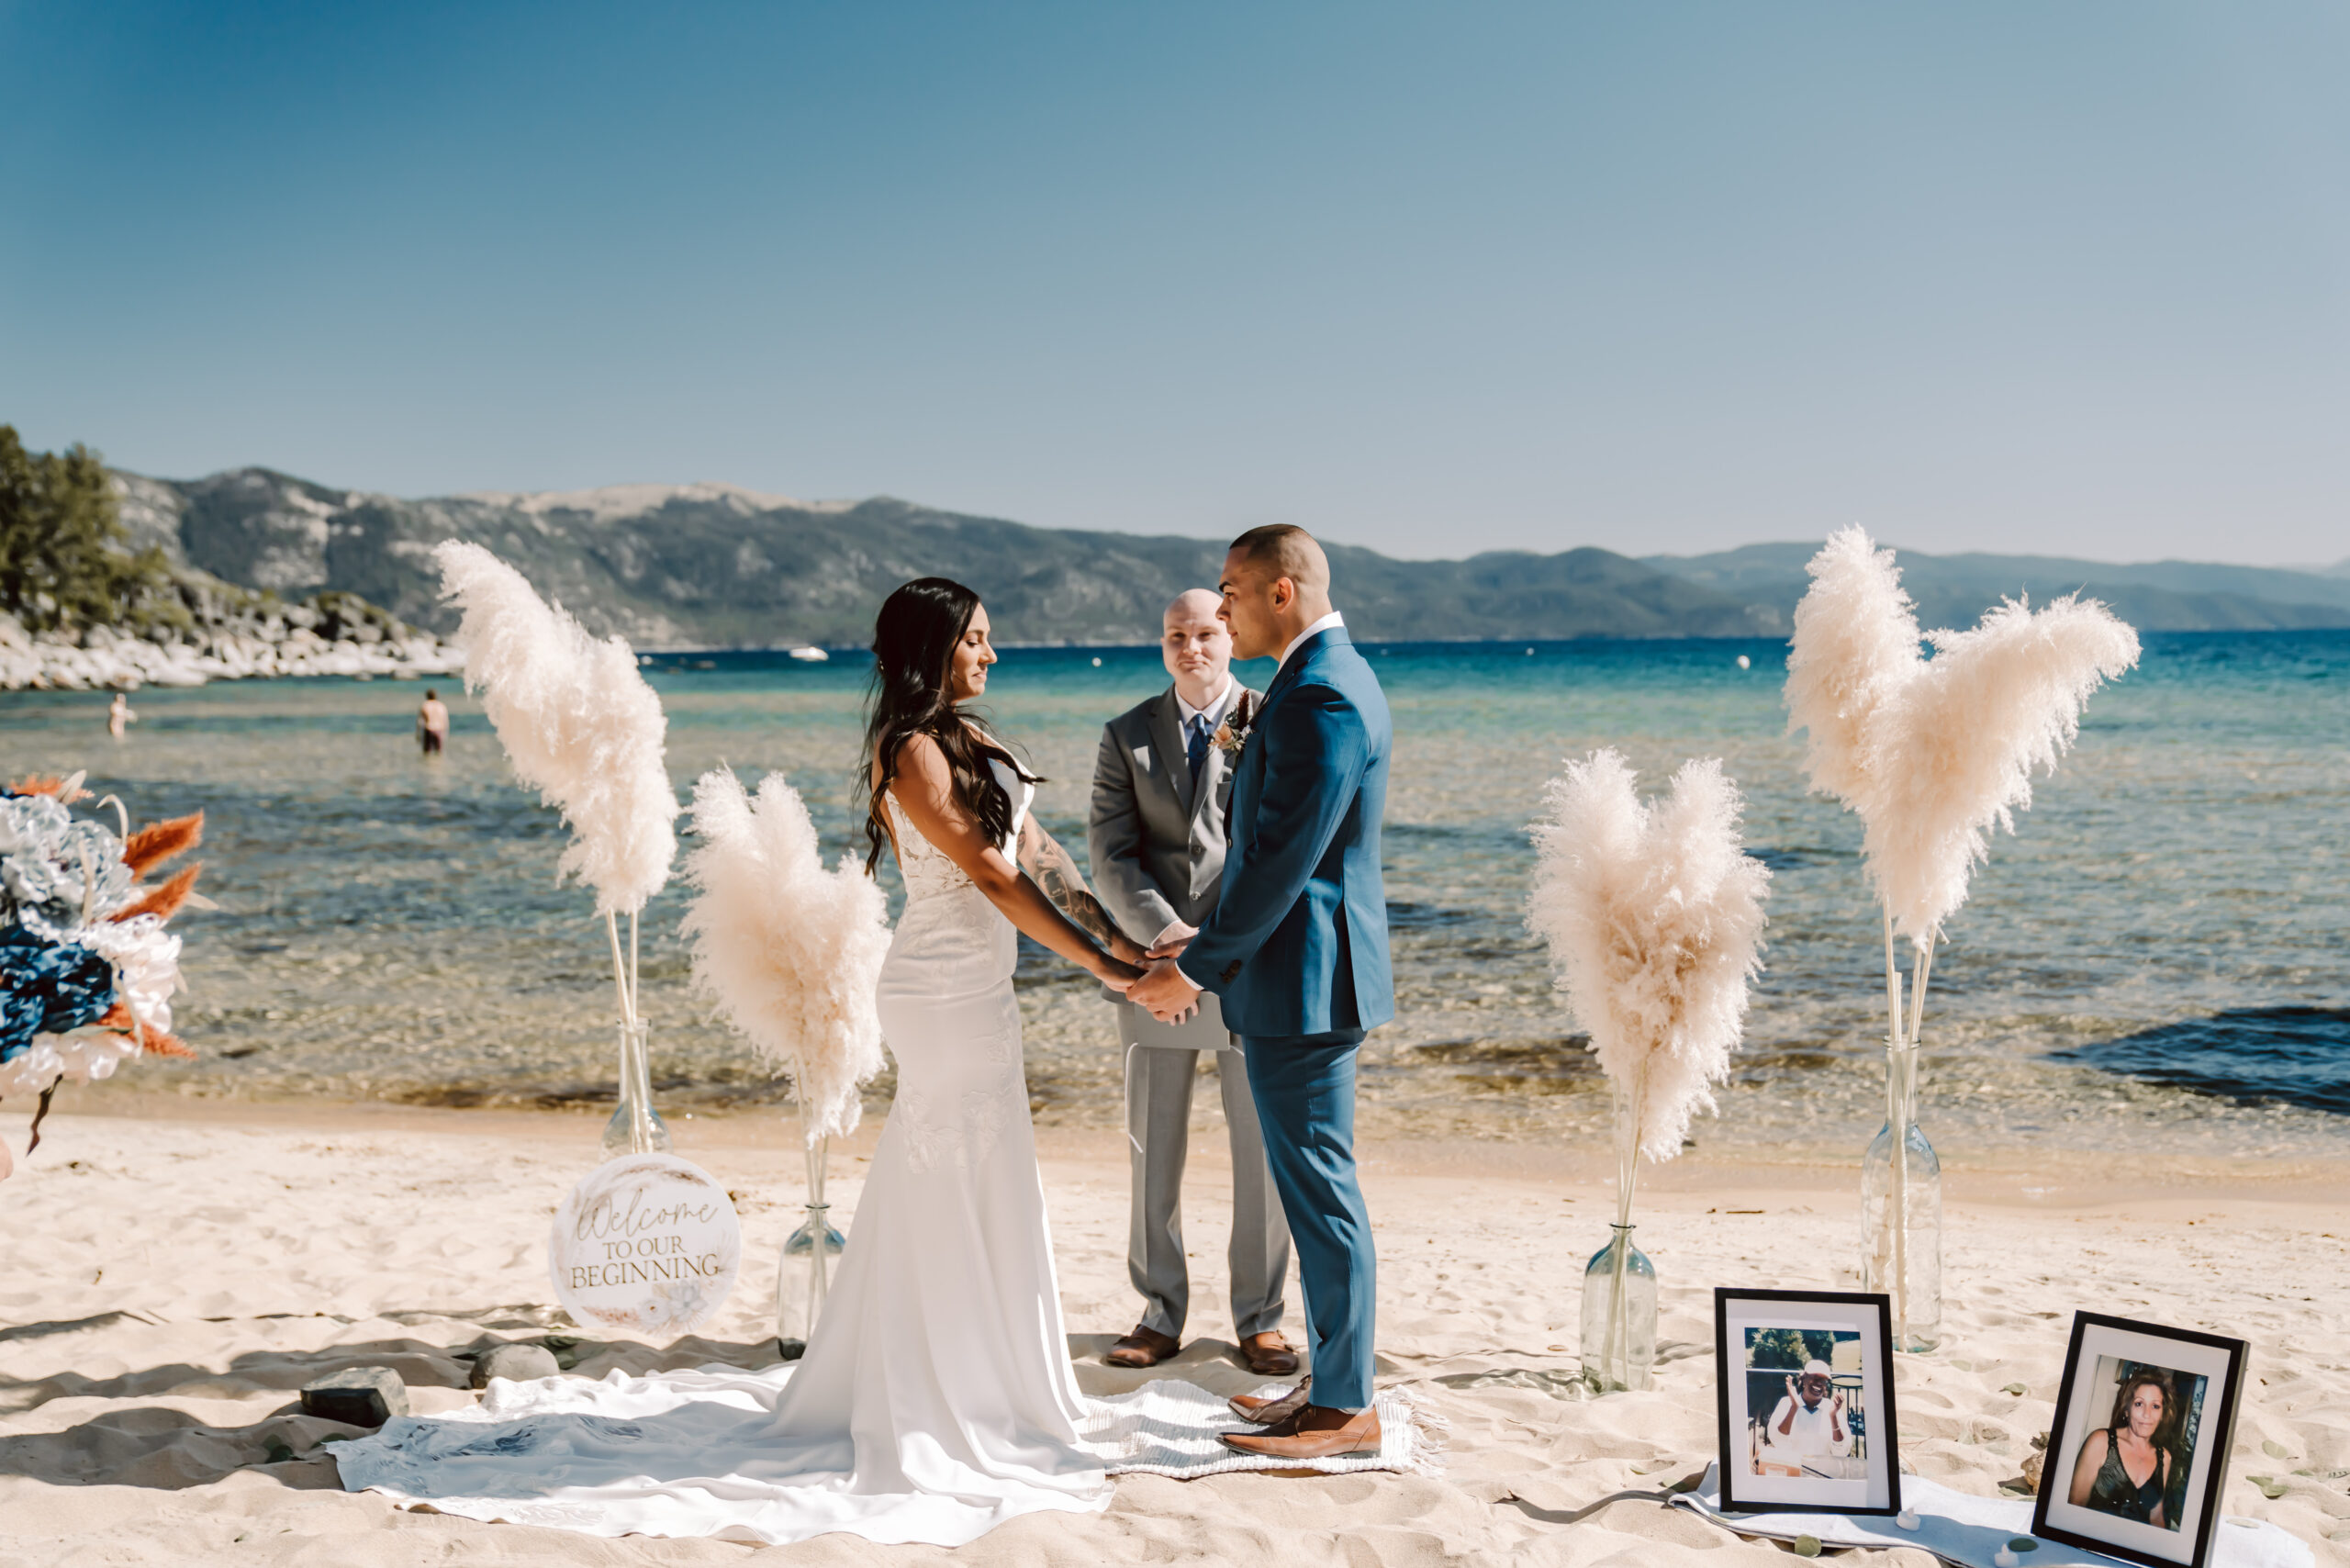 A bride and groom having a wedding ceremony on the beach in Lake Tahoe with beautiful feather decorations and mountains as the backdrop